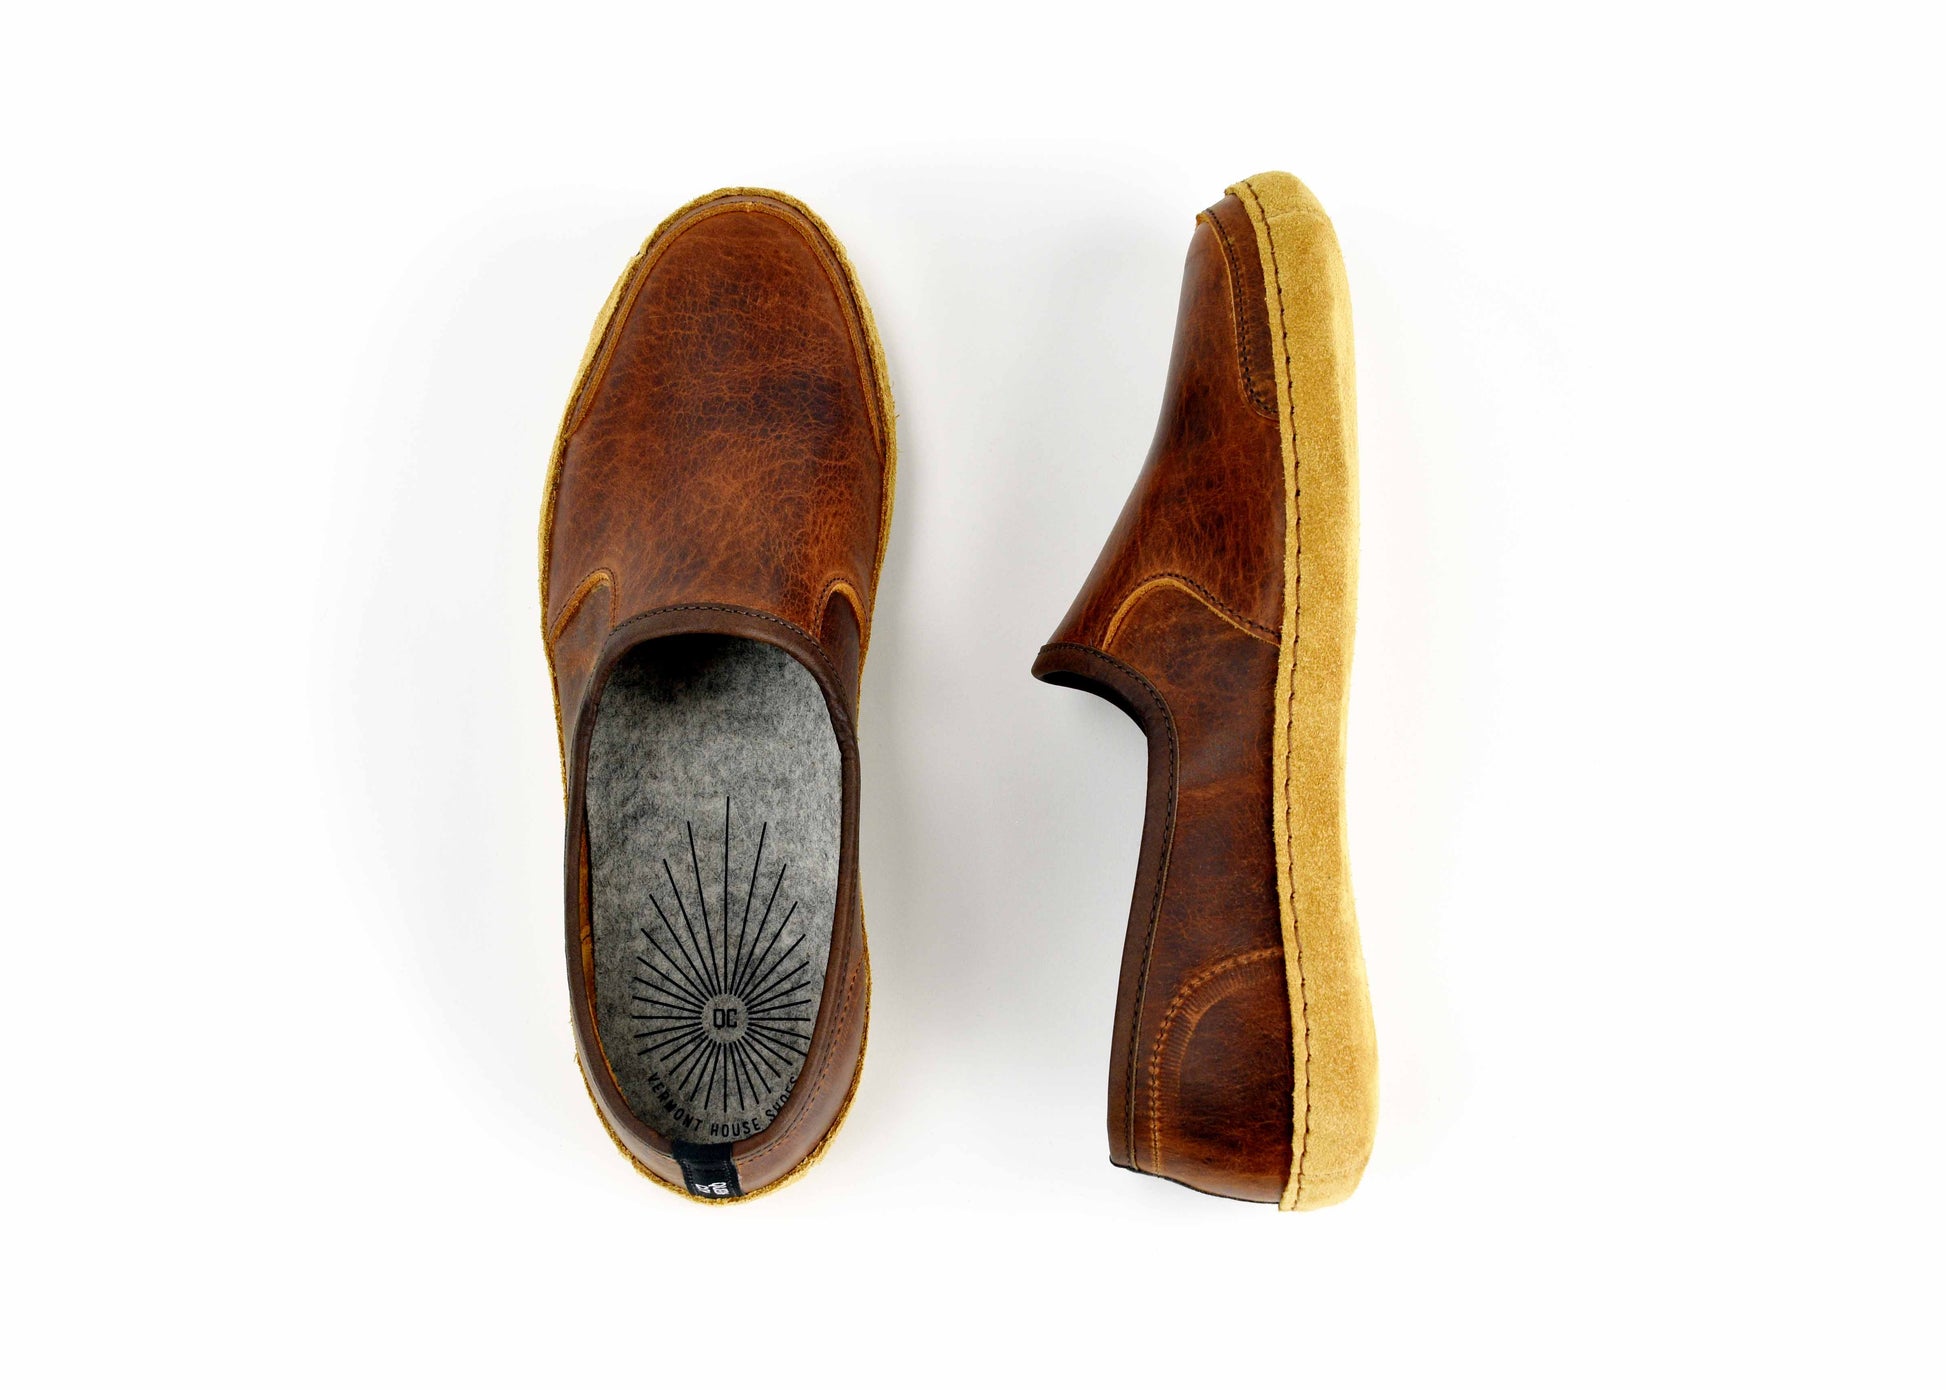 Vermont House Shoes - Loafer - Tobacco Bison top and side view